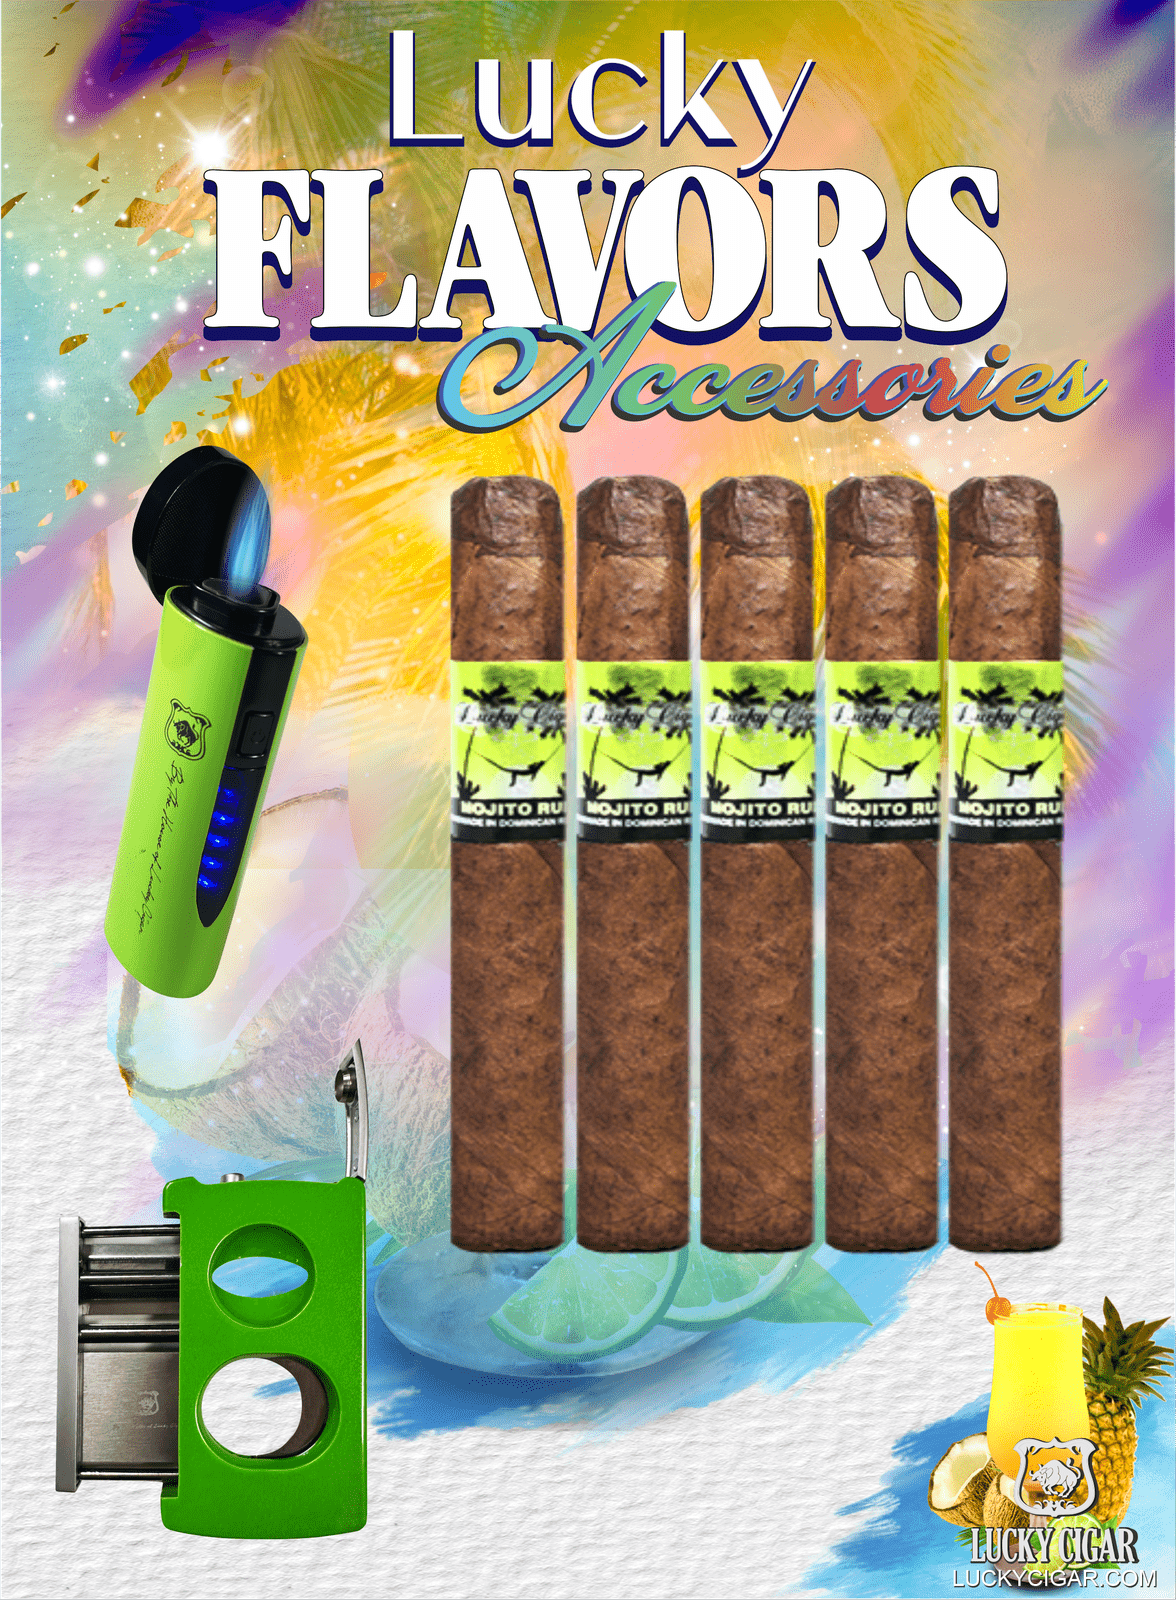 Flavored Cigars: Lucky Flavors 5 Mojito Rum Cigar Set with Torch and Cutter 